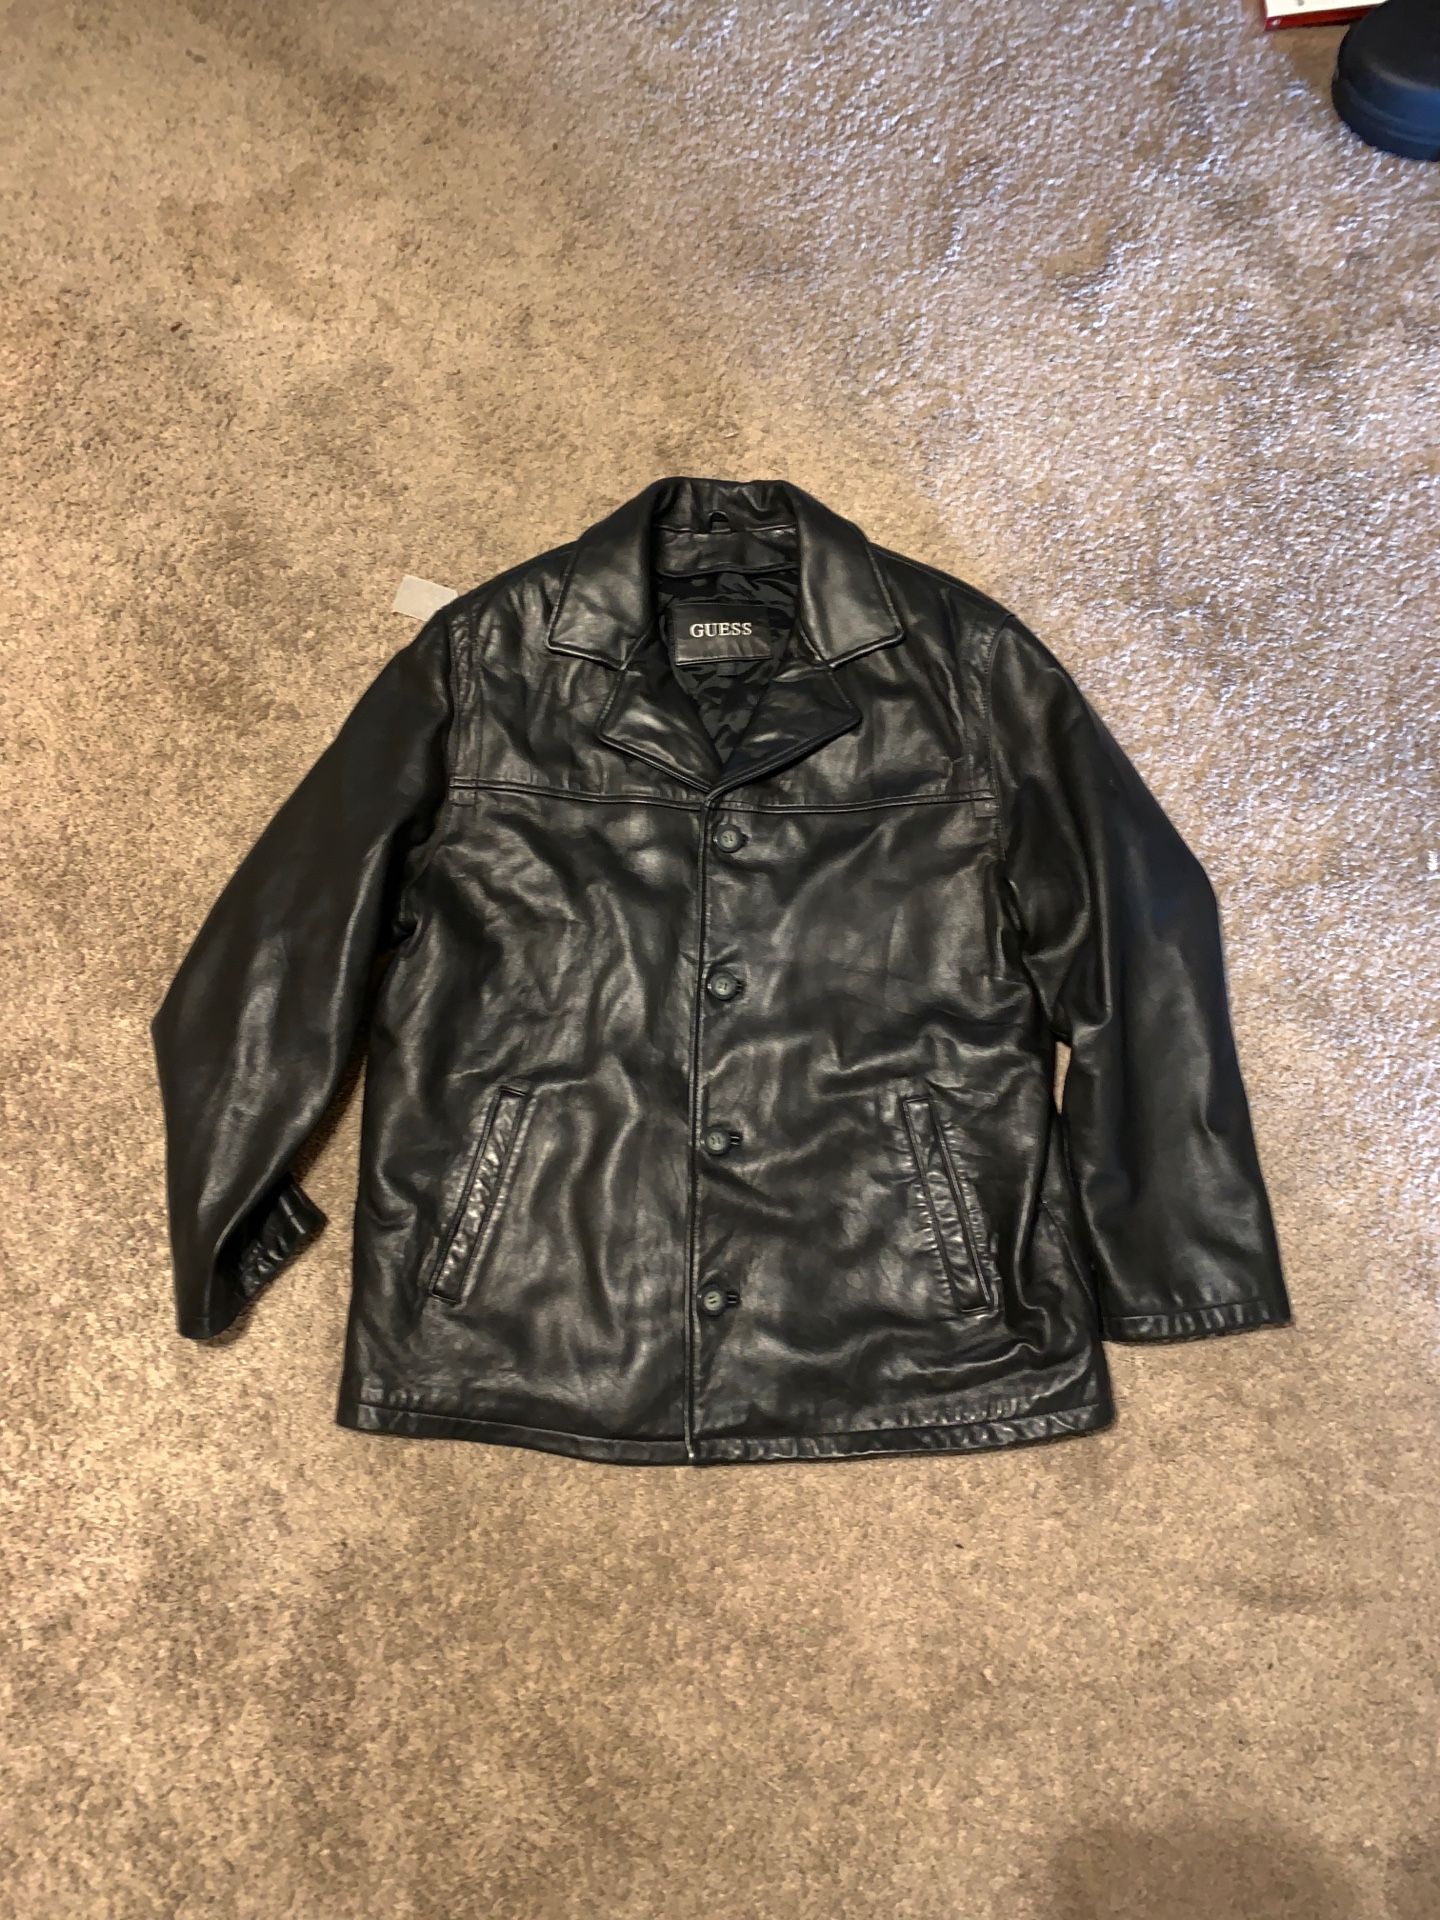 Leather Guess jacket (men’s large)